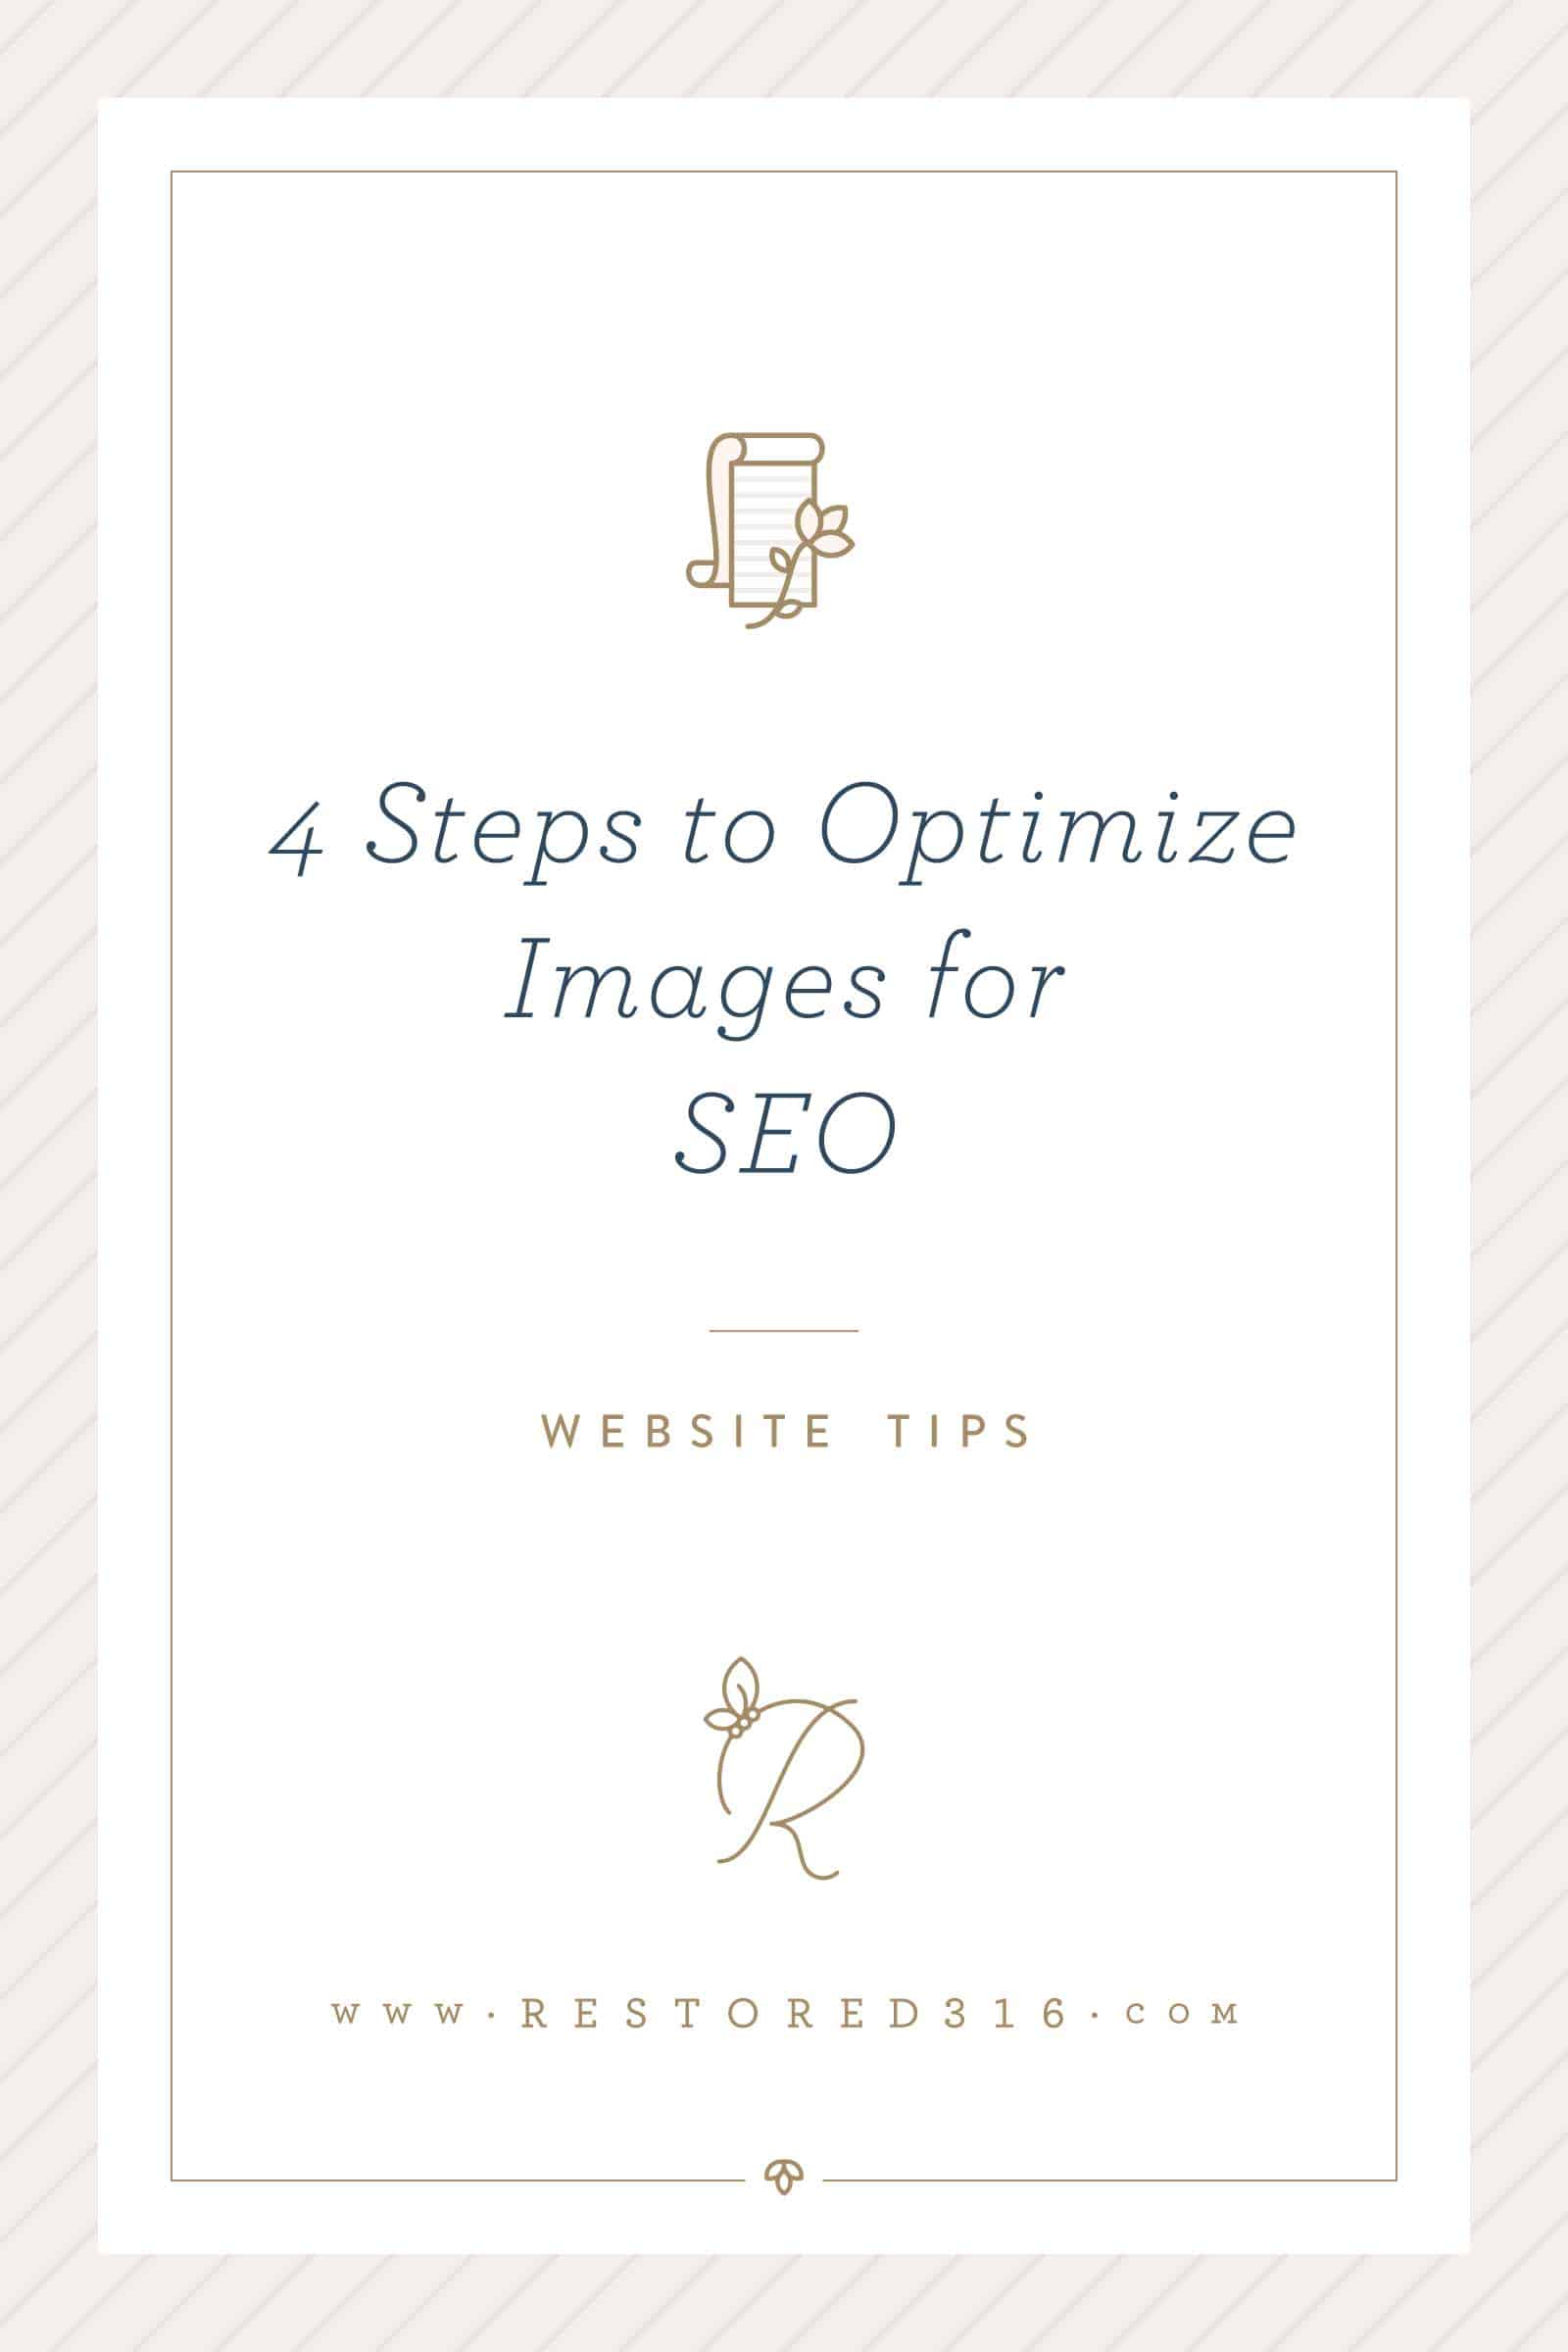 4 Steps to Optimize Images for SEO